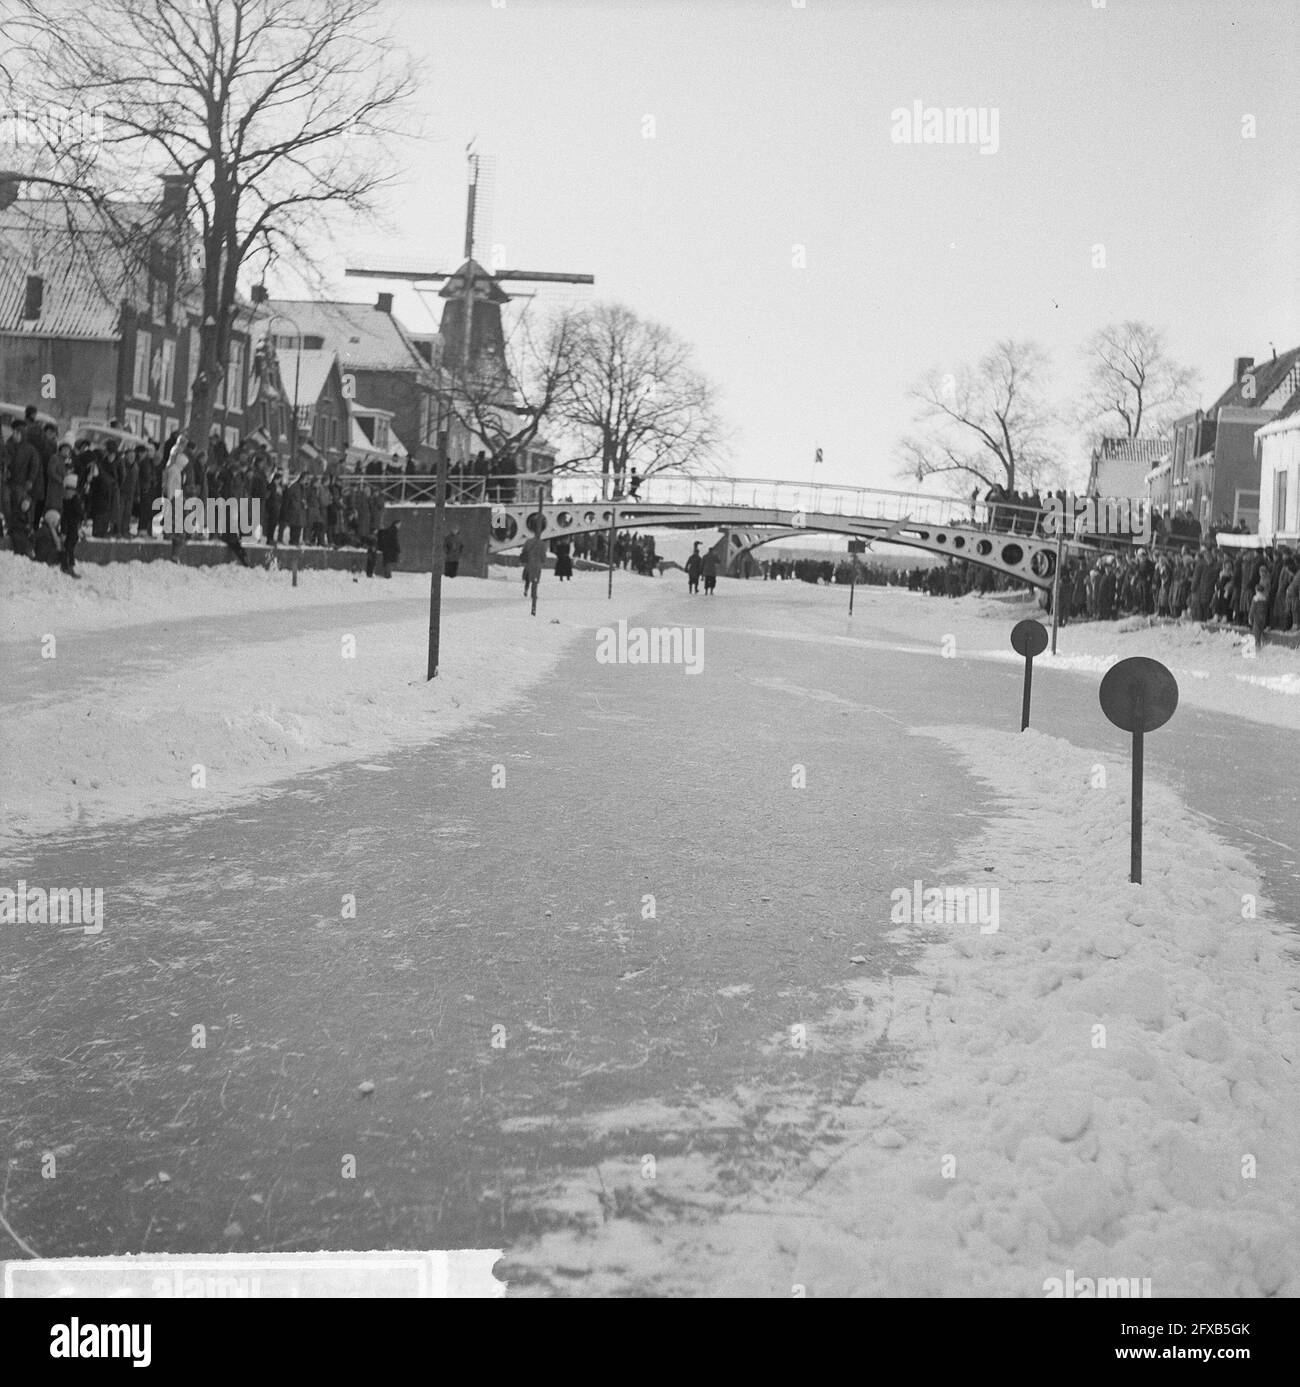 Elfstedentocht 1963. Dokkum. Kleindiep with Bonte Bridge, January 18, 1963, ice, skating, sports, The Netherlands, 20th century press agency photo, news to remember, documentary, historic photography 1945-1990, visual stories, human history of the Twentieth Century, capturing moments in time Stock Photo